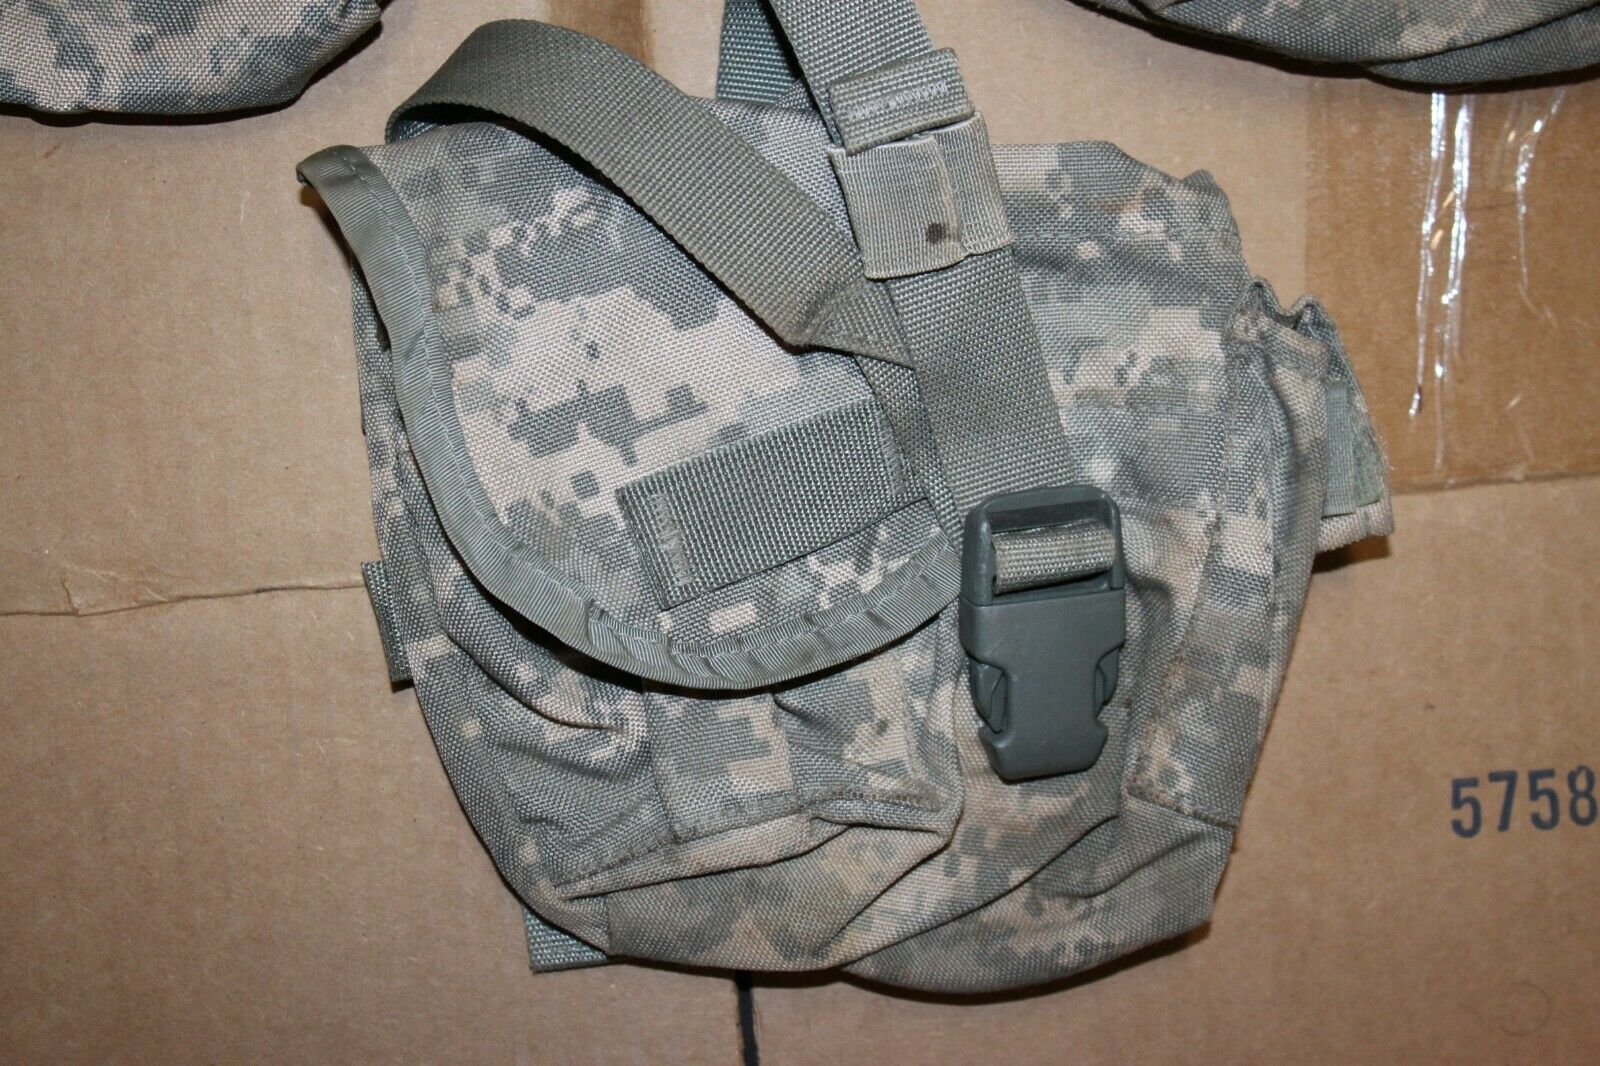 (5) US Military 1 QT MOLLE ACU Camo Canteen Cover Carrier Utility Pouch Damaged